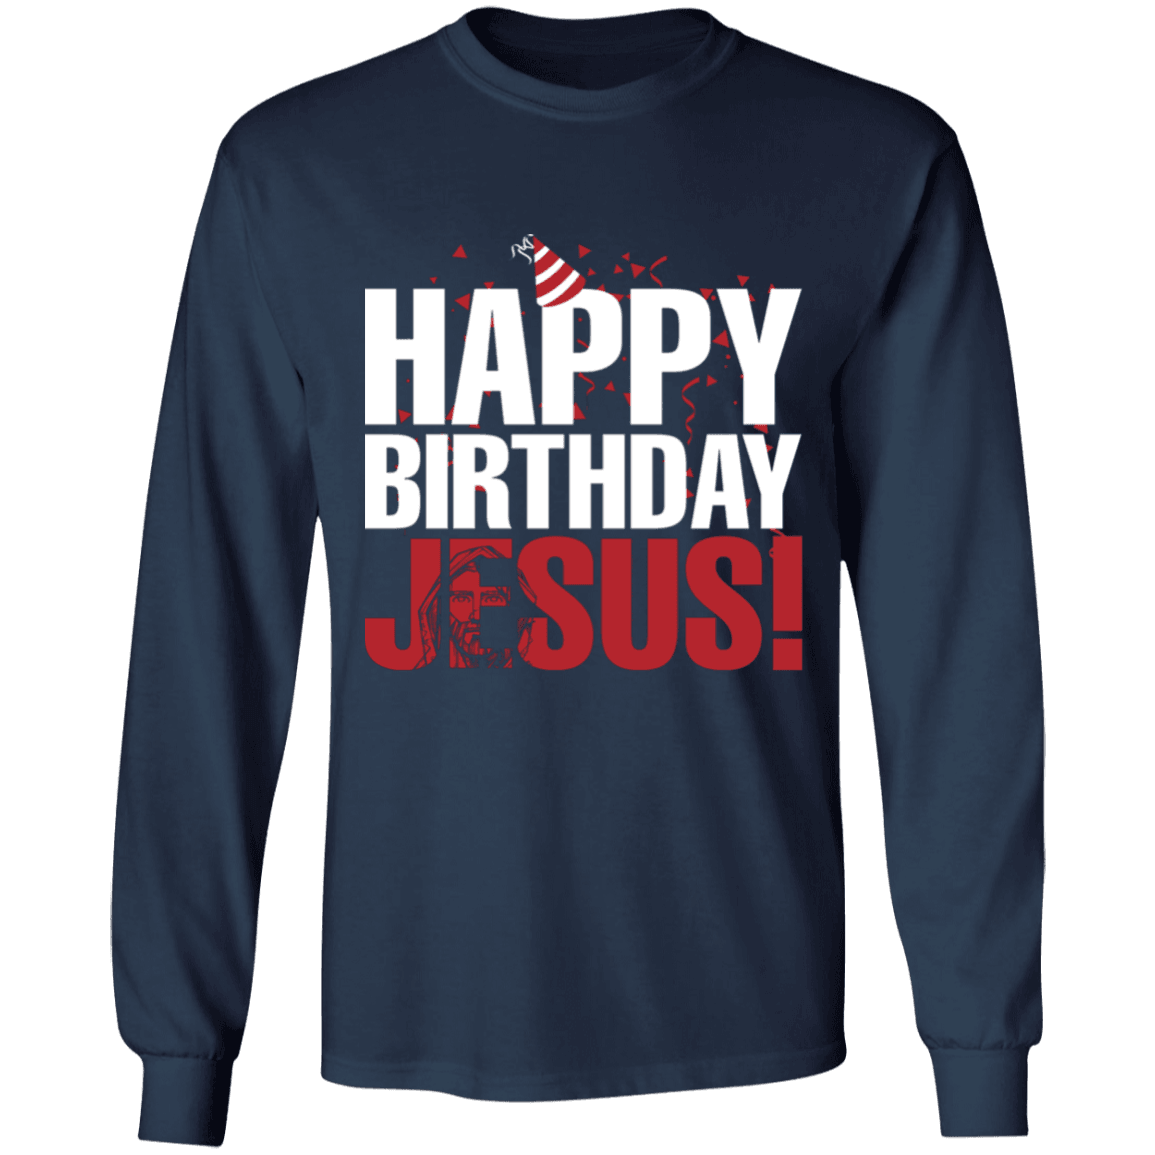 Designs by MyUtopia Shout Out:Happy Birthday Jesus - Ultra Cotton Long Sleeve T-Shirt,Navy / S,Long Sleeve T-Shirts